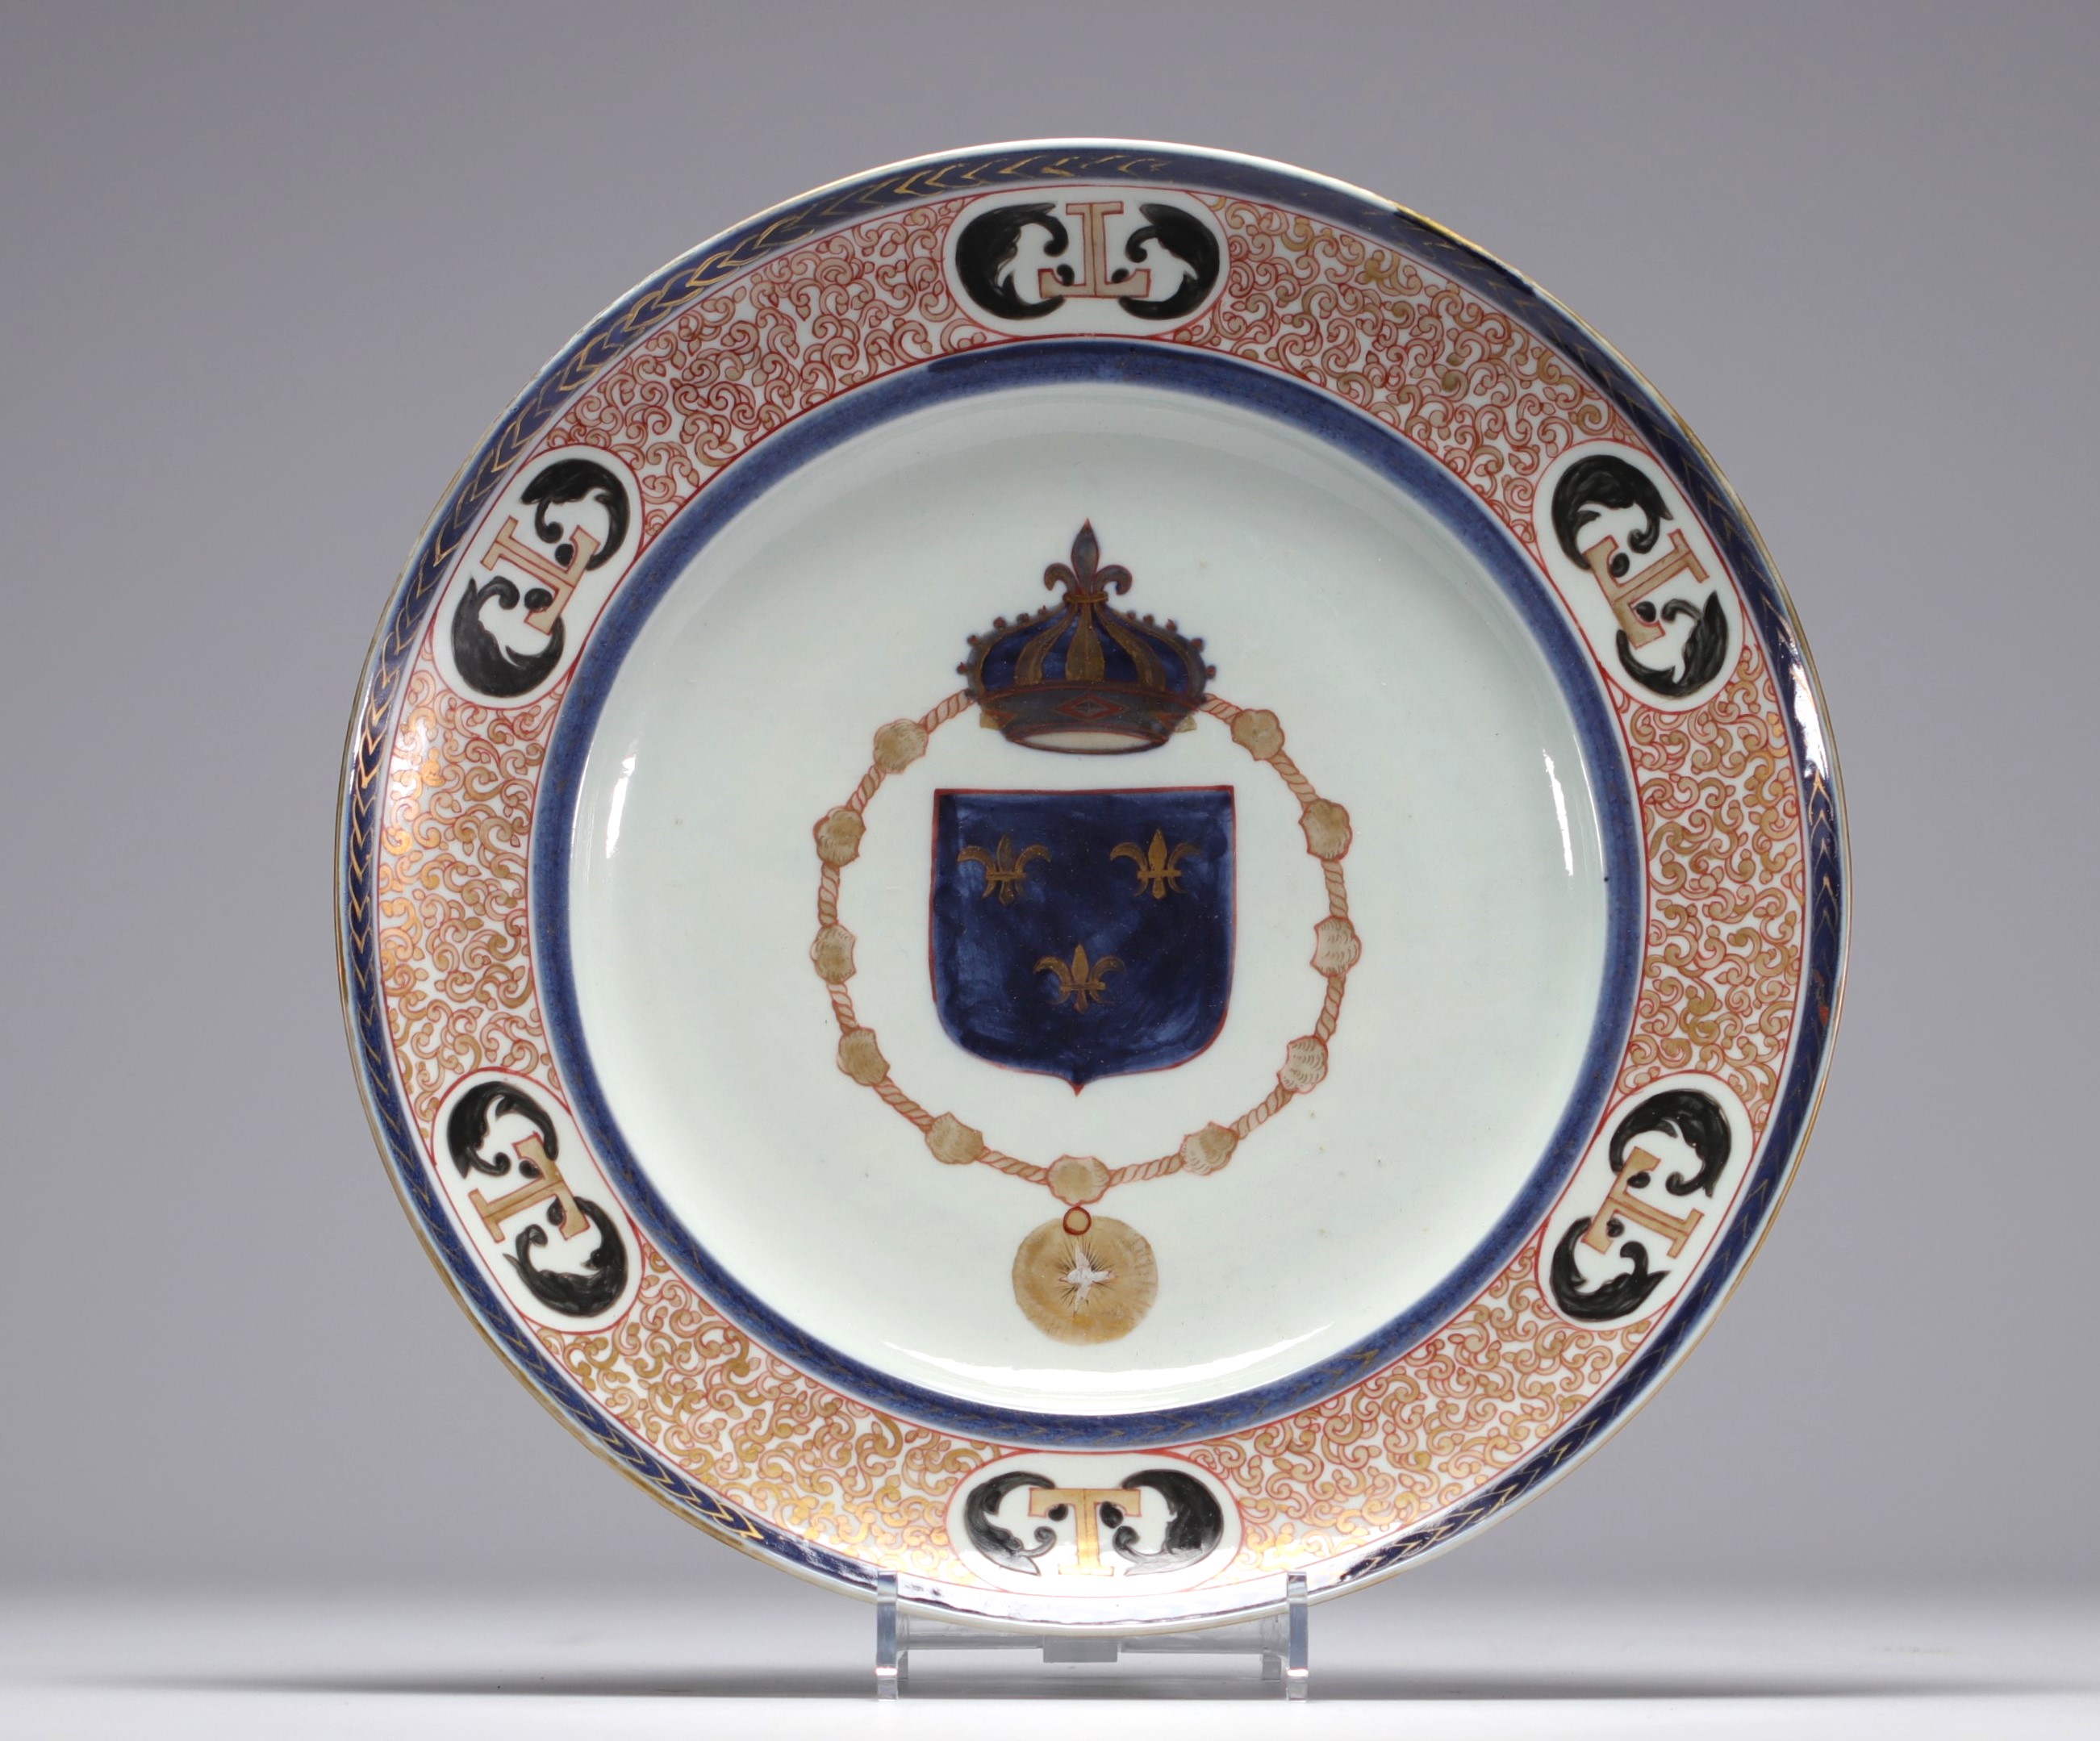 Large Samson porcelain dish decorated with a coat of arms, late 19th century.